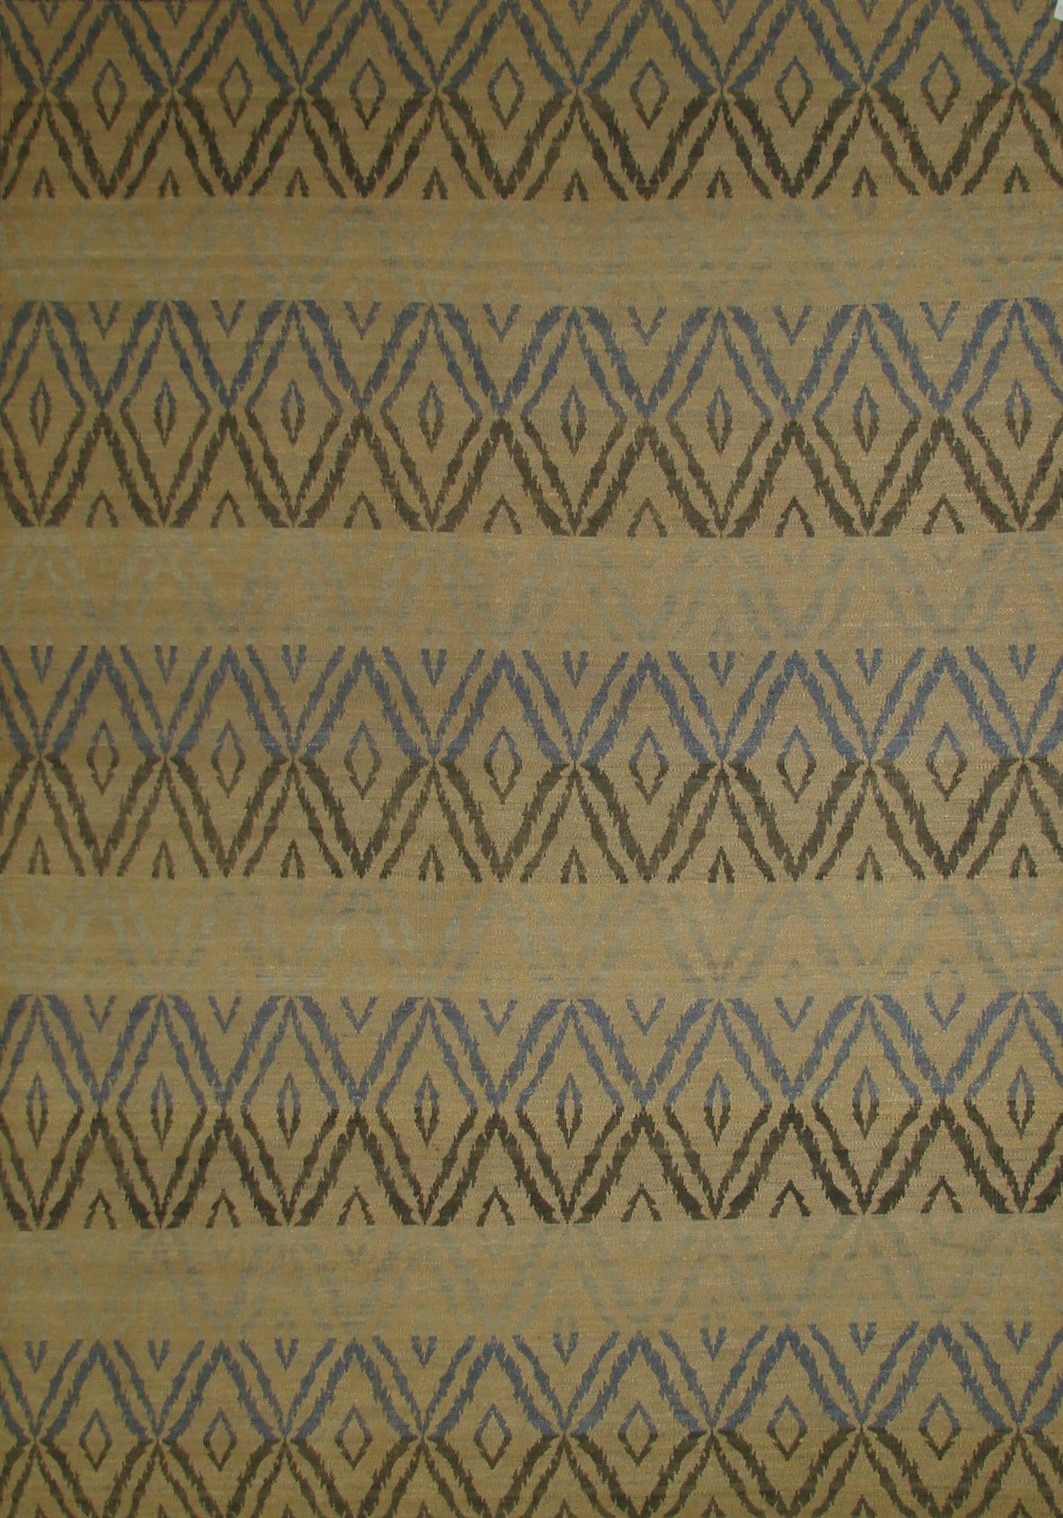 Woven Rugs DH-WV SD-5 WB Lt. Gold - Gold & Multi Flat weave Rug